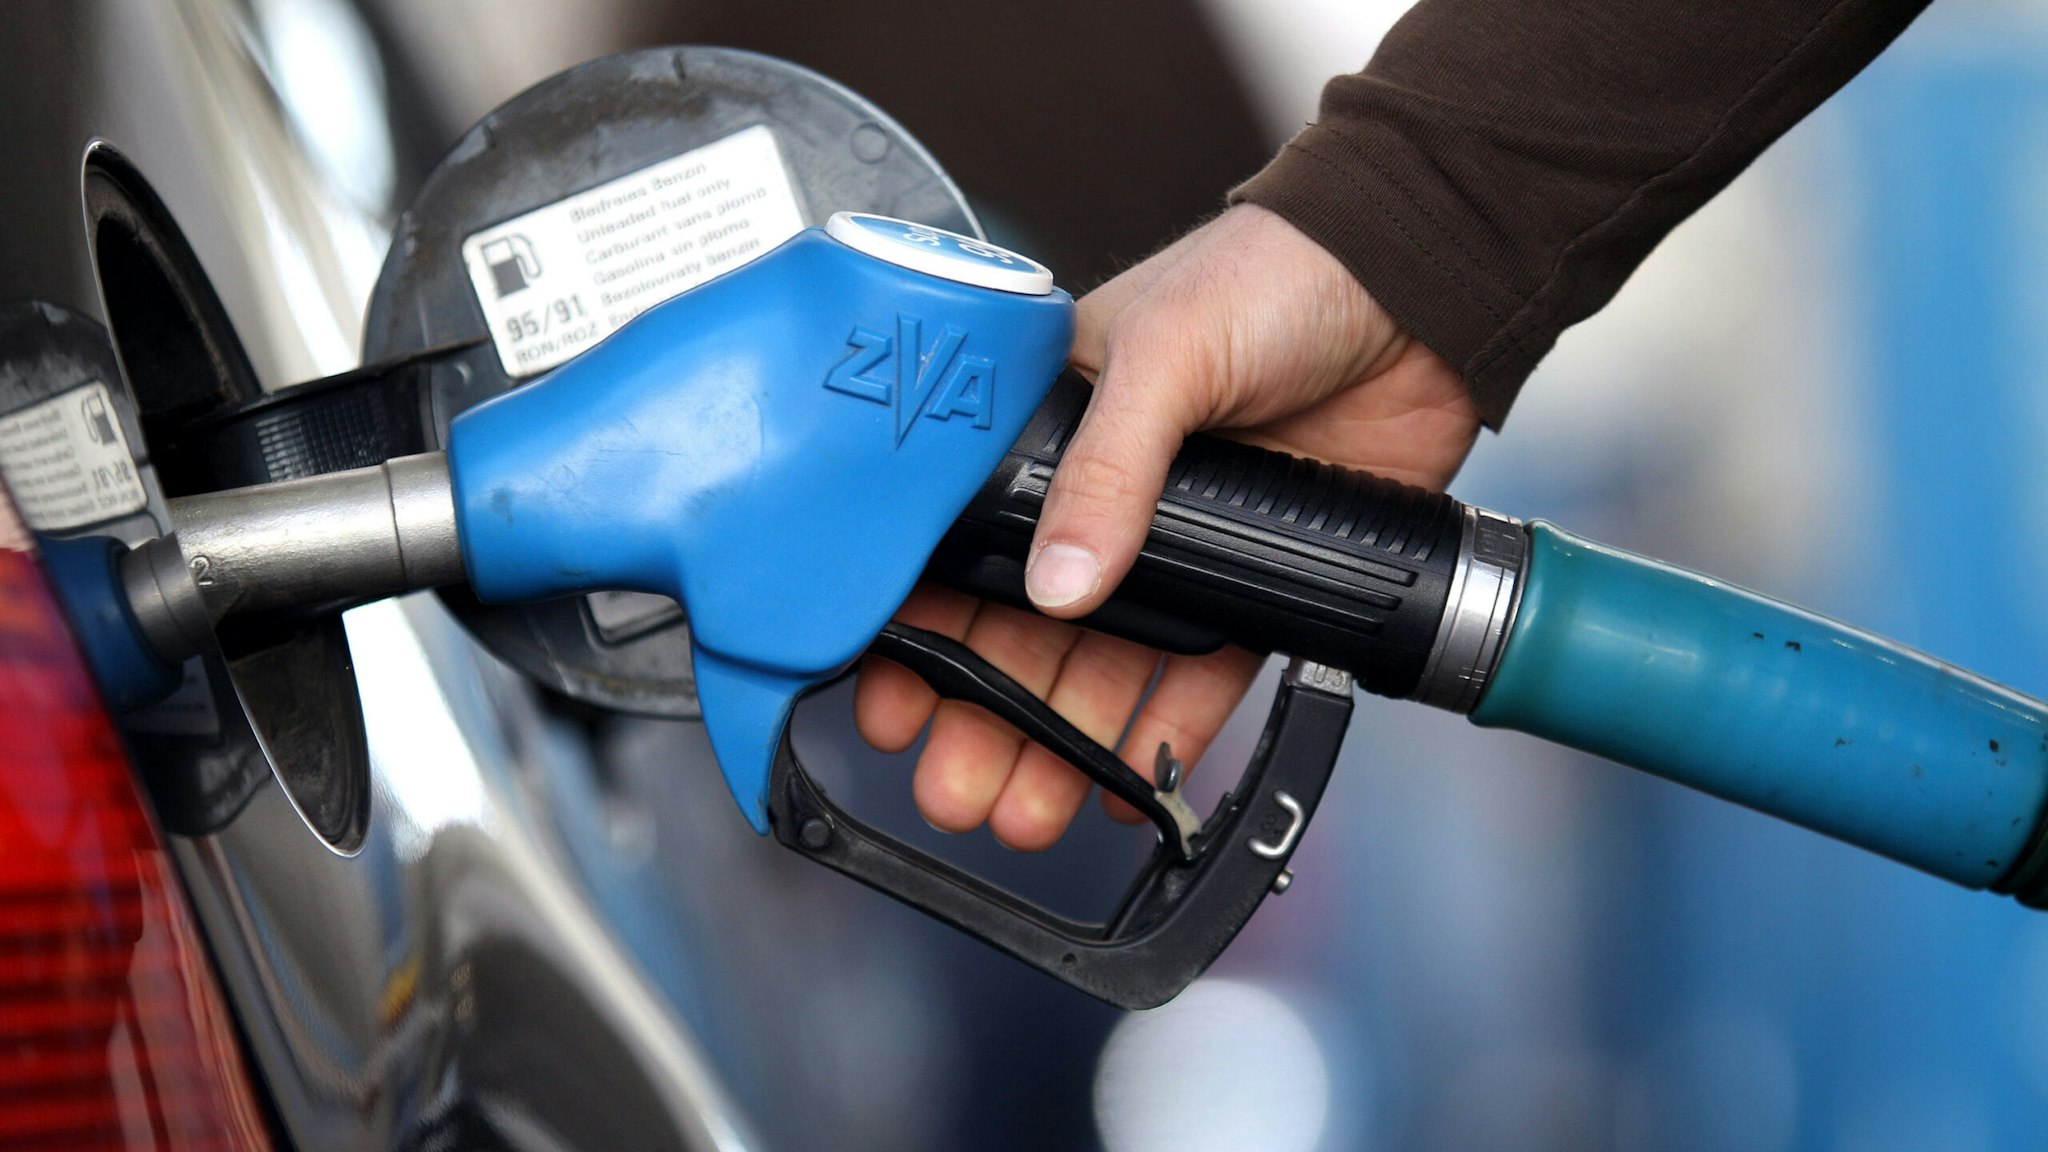 MUNICH, GERMANY - MARCH 23: In this photo illustration a man refuels his car on March 23, 2010 in Munich, Germany. German President Horst Koehler said higher petrol prices could help make Germans become more environmentally conscious.